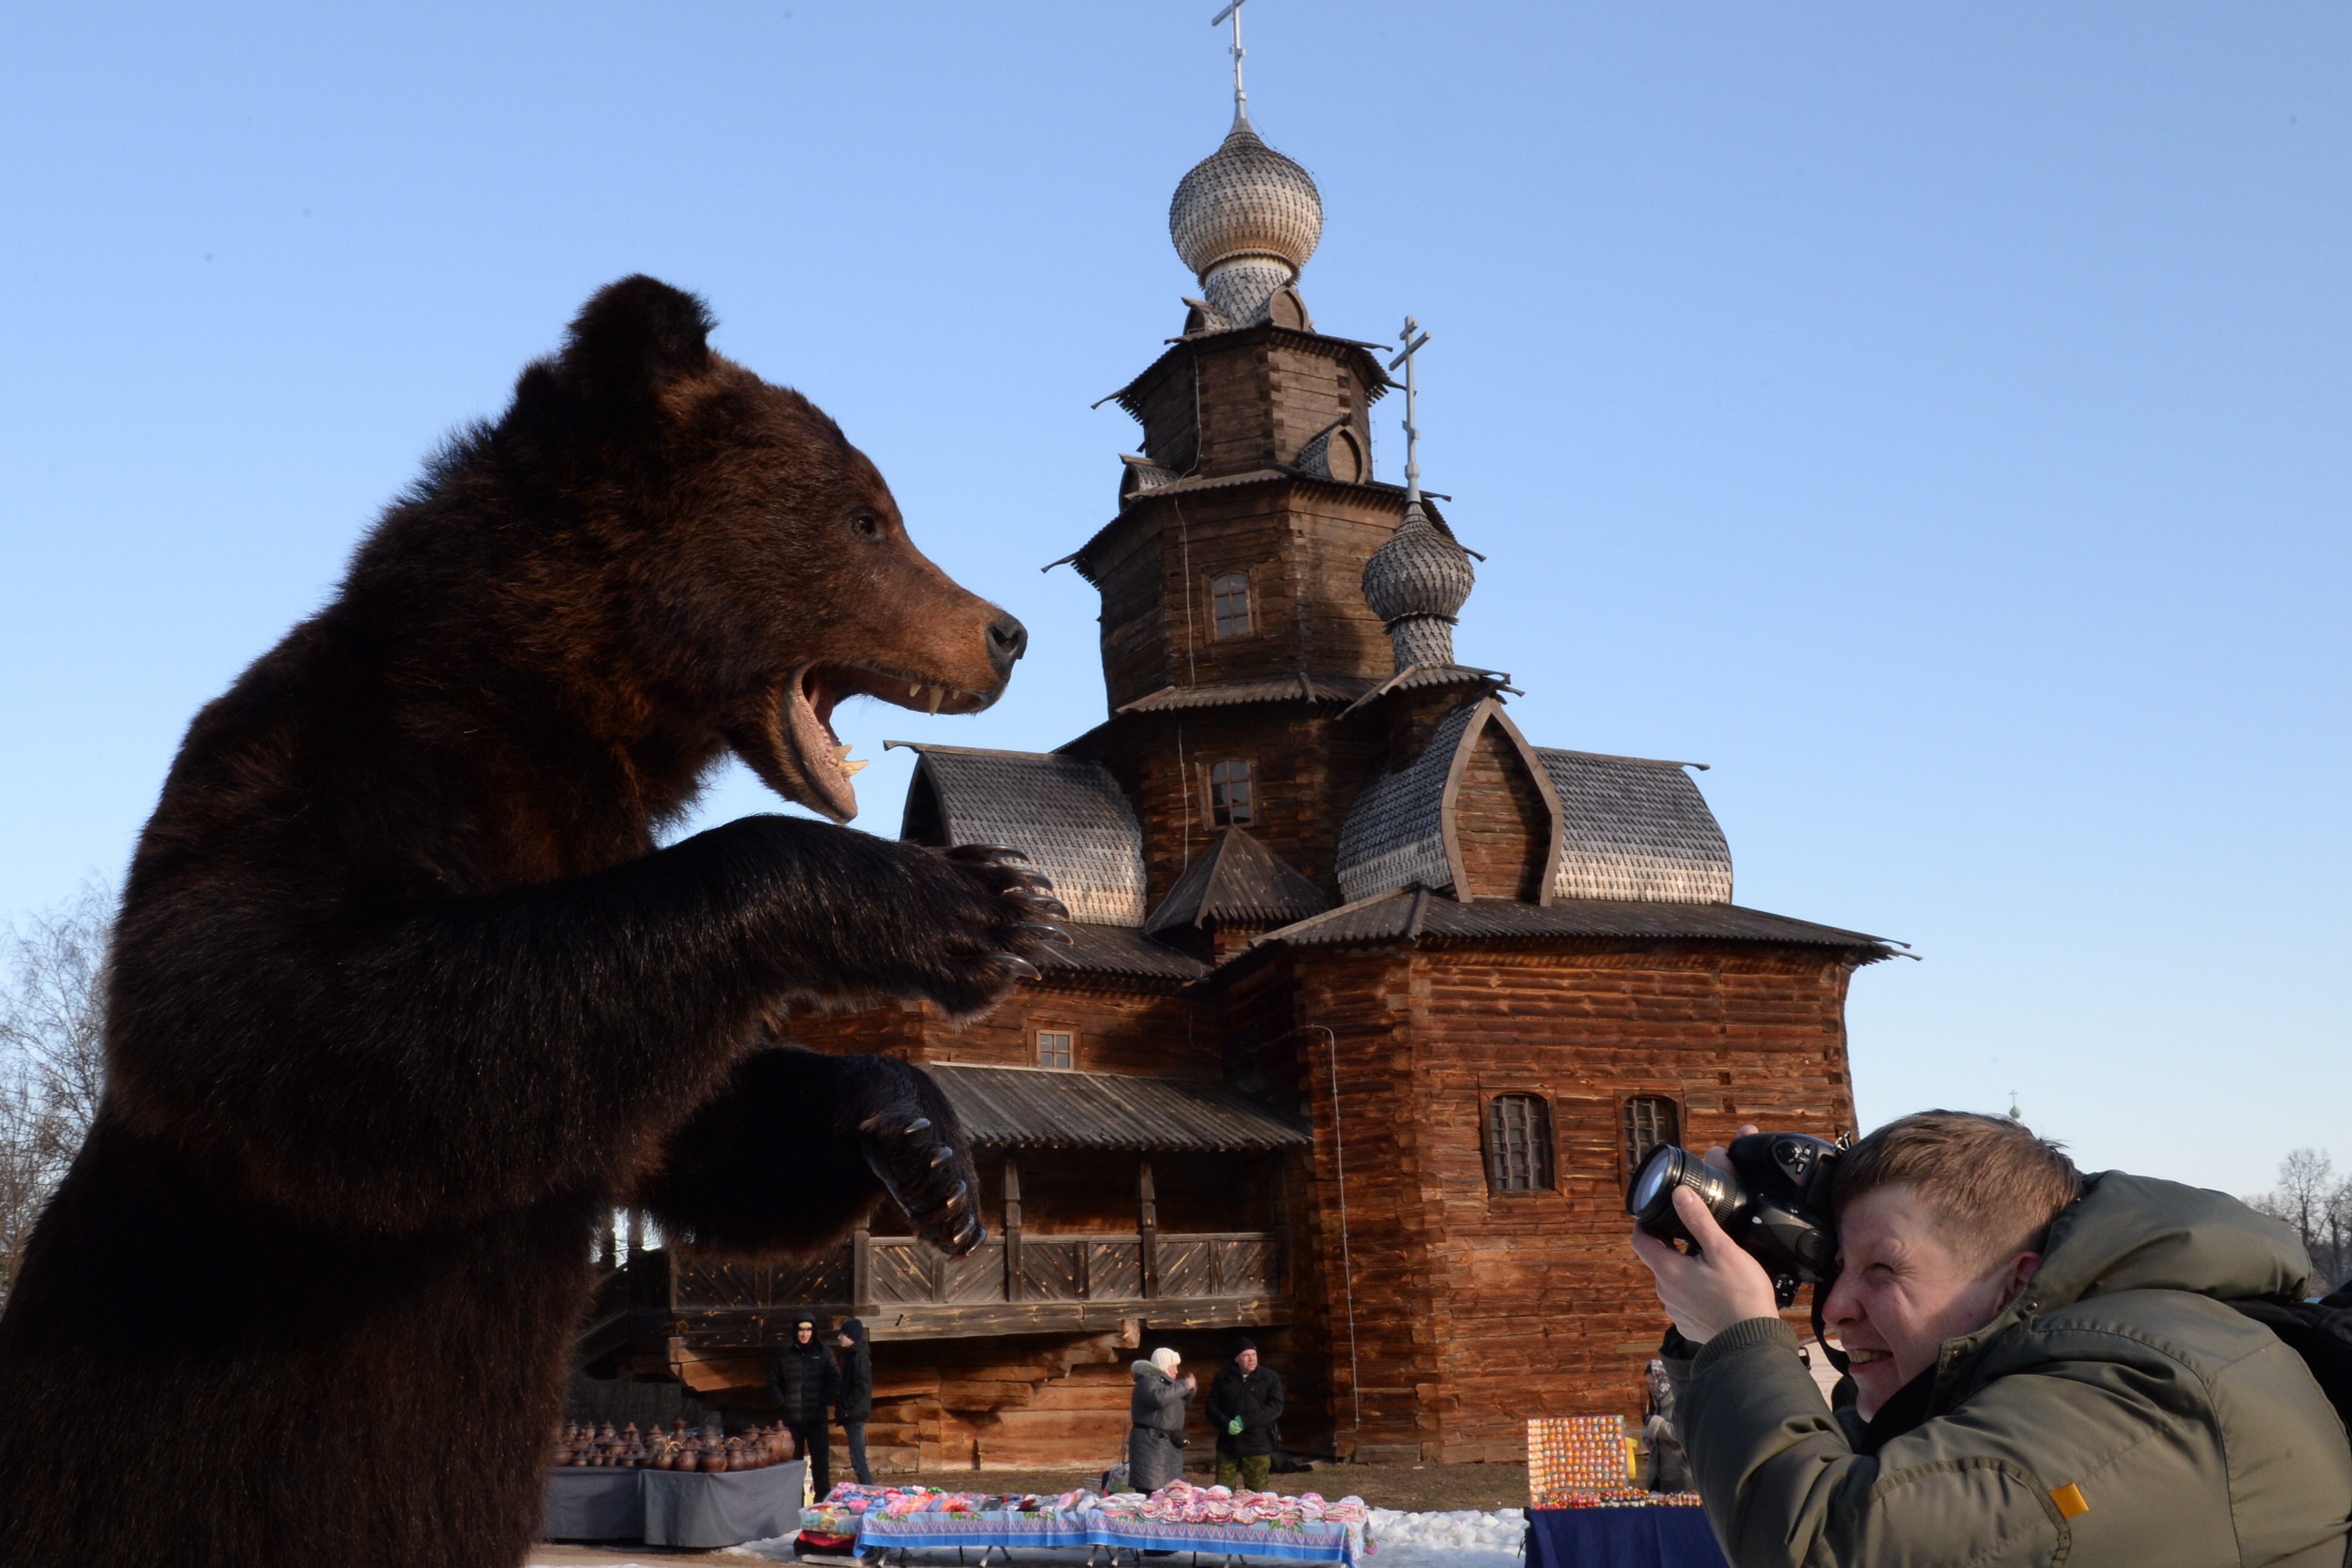 A man photographs a stuffed bear at the Museum of Wooden Architecture in Suzdal during Maslenitsa festivities.